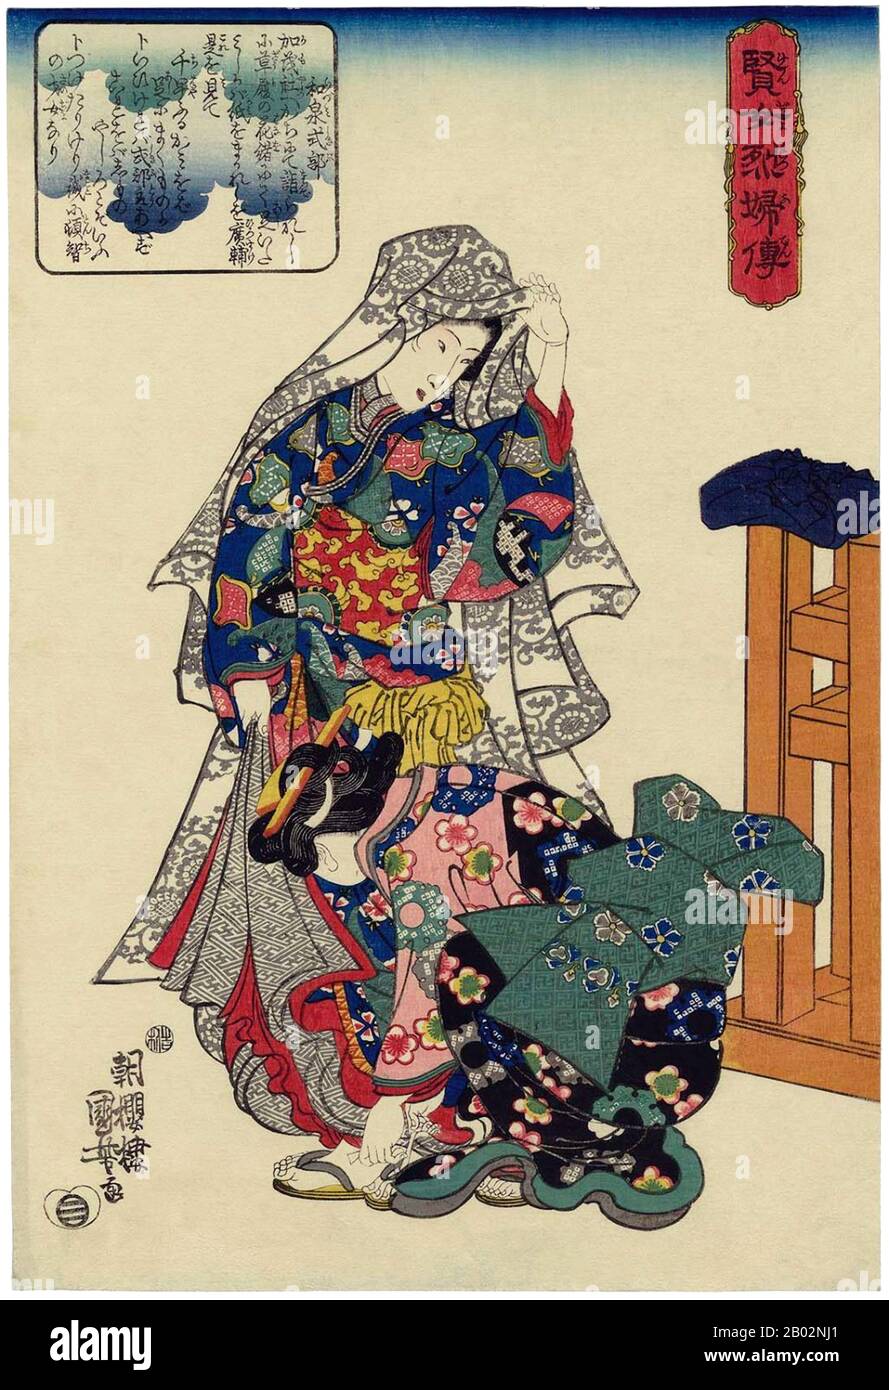 A member of the Thirty-six Medieval Poetry Immortals, Izumi Shikibu served at the court of Empress Shoshi (988–1074).  She is best known for the Izumi Shikibu Collection (和泉式部集 Izumi Shikibu-shū) and the Imperial anthologies. Her life of love and passion earned her the nickname of 'The Floating Lady' from Michinaga. Her poetry is characterized by passion and sentimental appeal. Her style was the direct opposite of that of Akazome Emon, even though both served in the same court and were close friends.  At the court she also nursed a growing rivalry with Murasaki Shikibu, who had a similar poeti Stock Photo